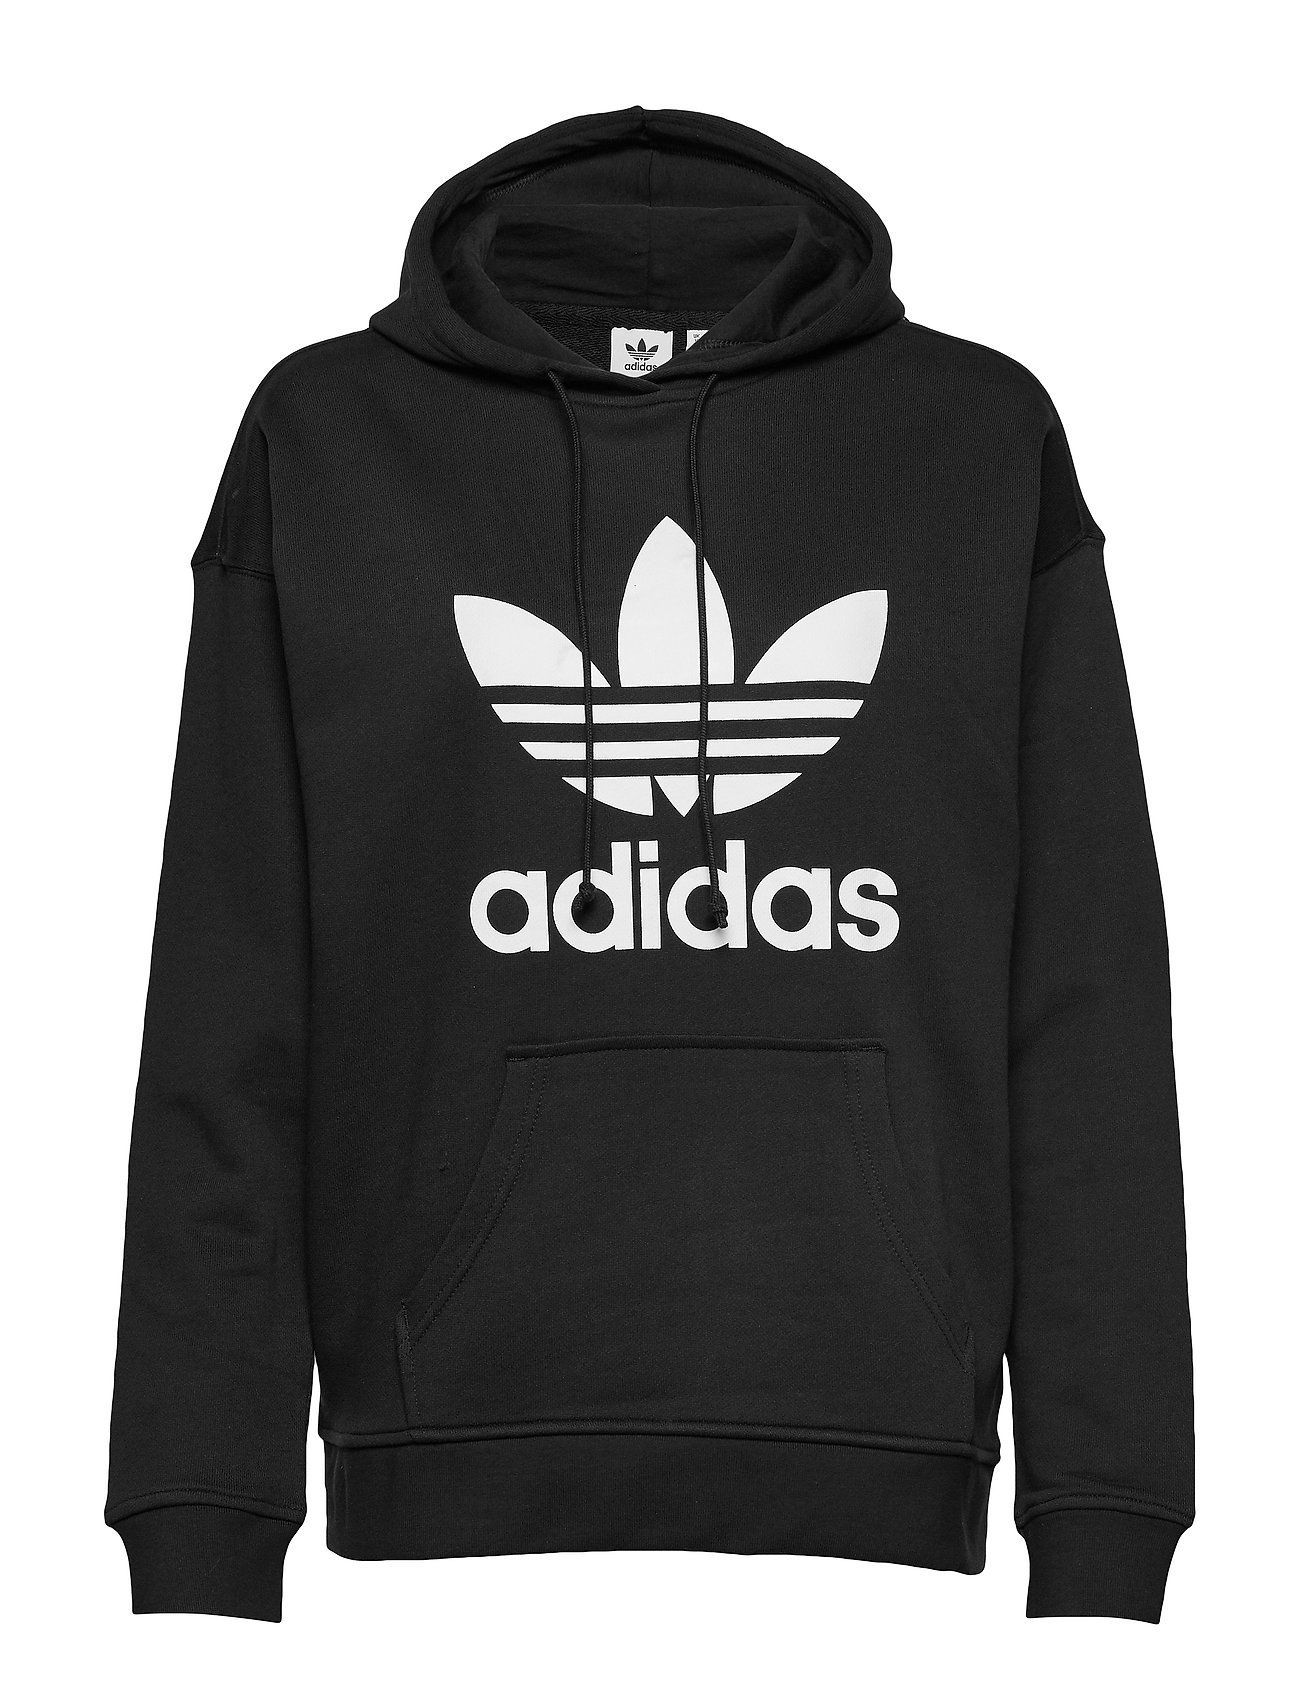 adidas Originals Trf Hoodie (Black/white), (39 €) | Large selection of  outlet-styles | Booztlet.com